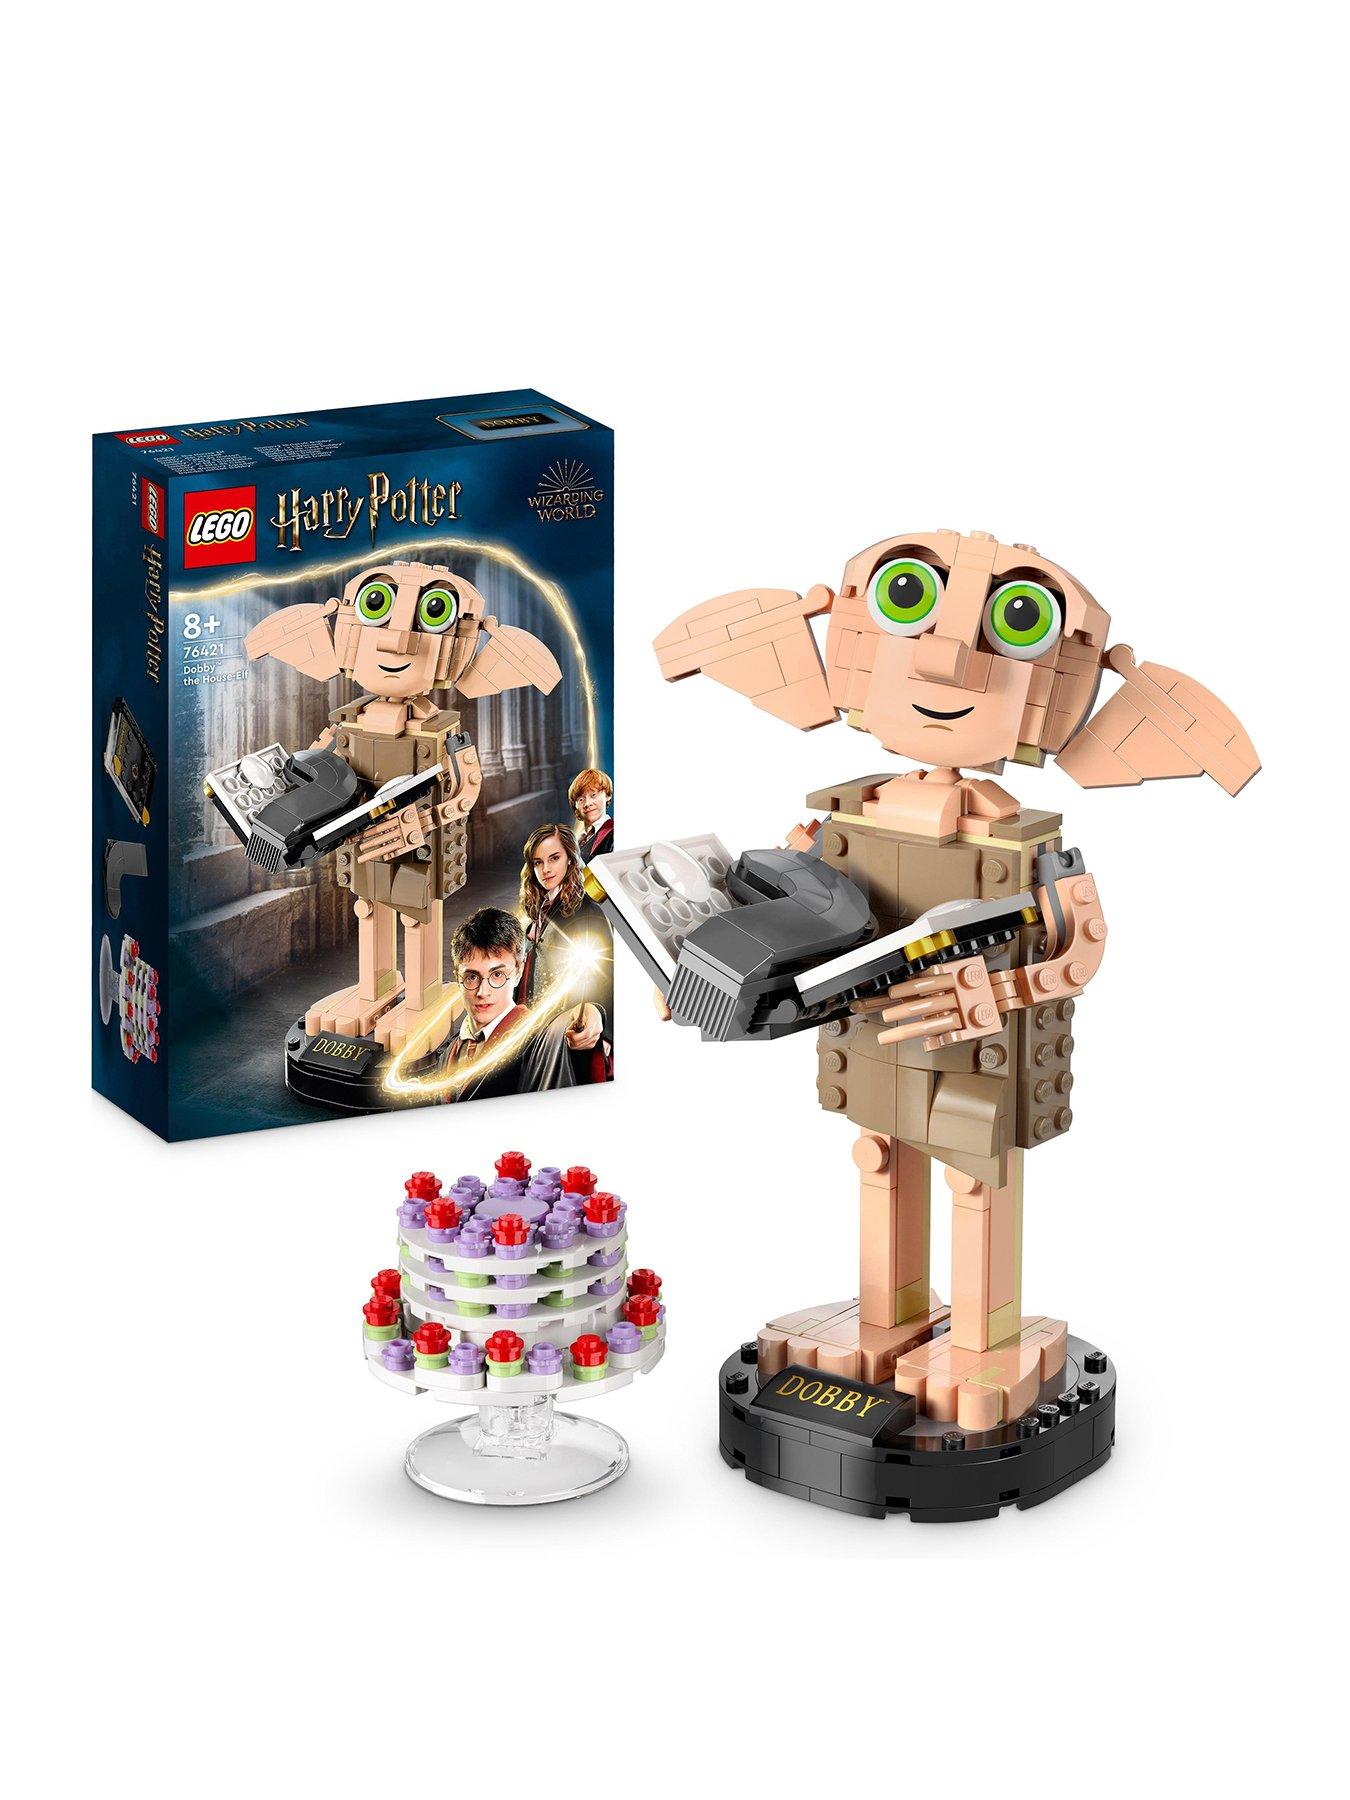  Wizarding World, Magical Minis Collectible 7.6cm Dumbledore  Figure, Kids' Toys for Girls and Boys Aged 5 and Up : Toys & Games